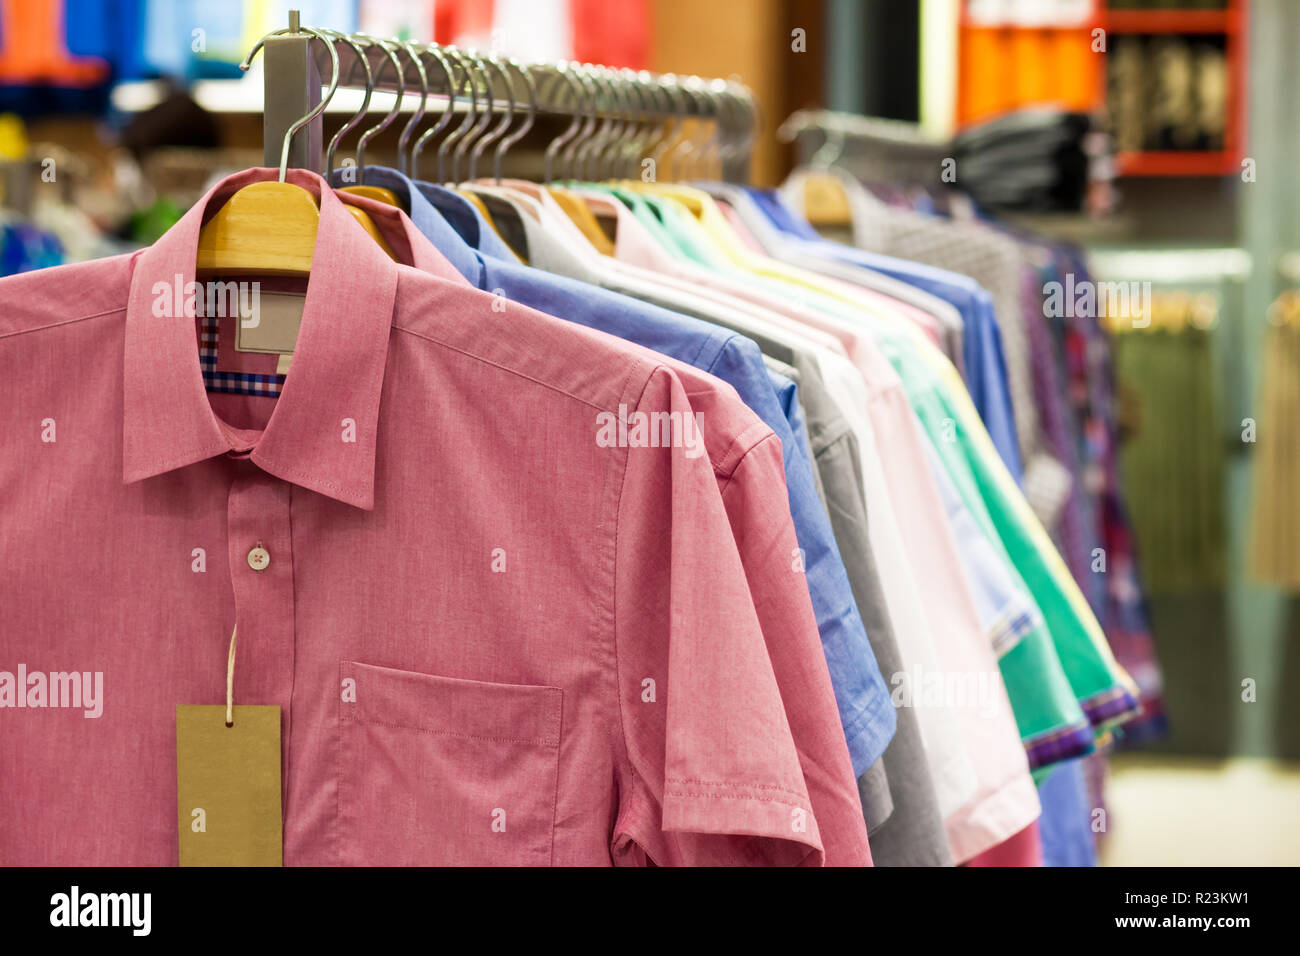 https://c8.alamy.com/comp/R23KW1/colored-shirts-on-hangers-in-a-shop-R23KW1.jpg